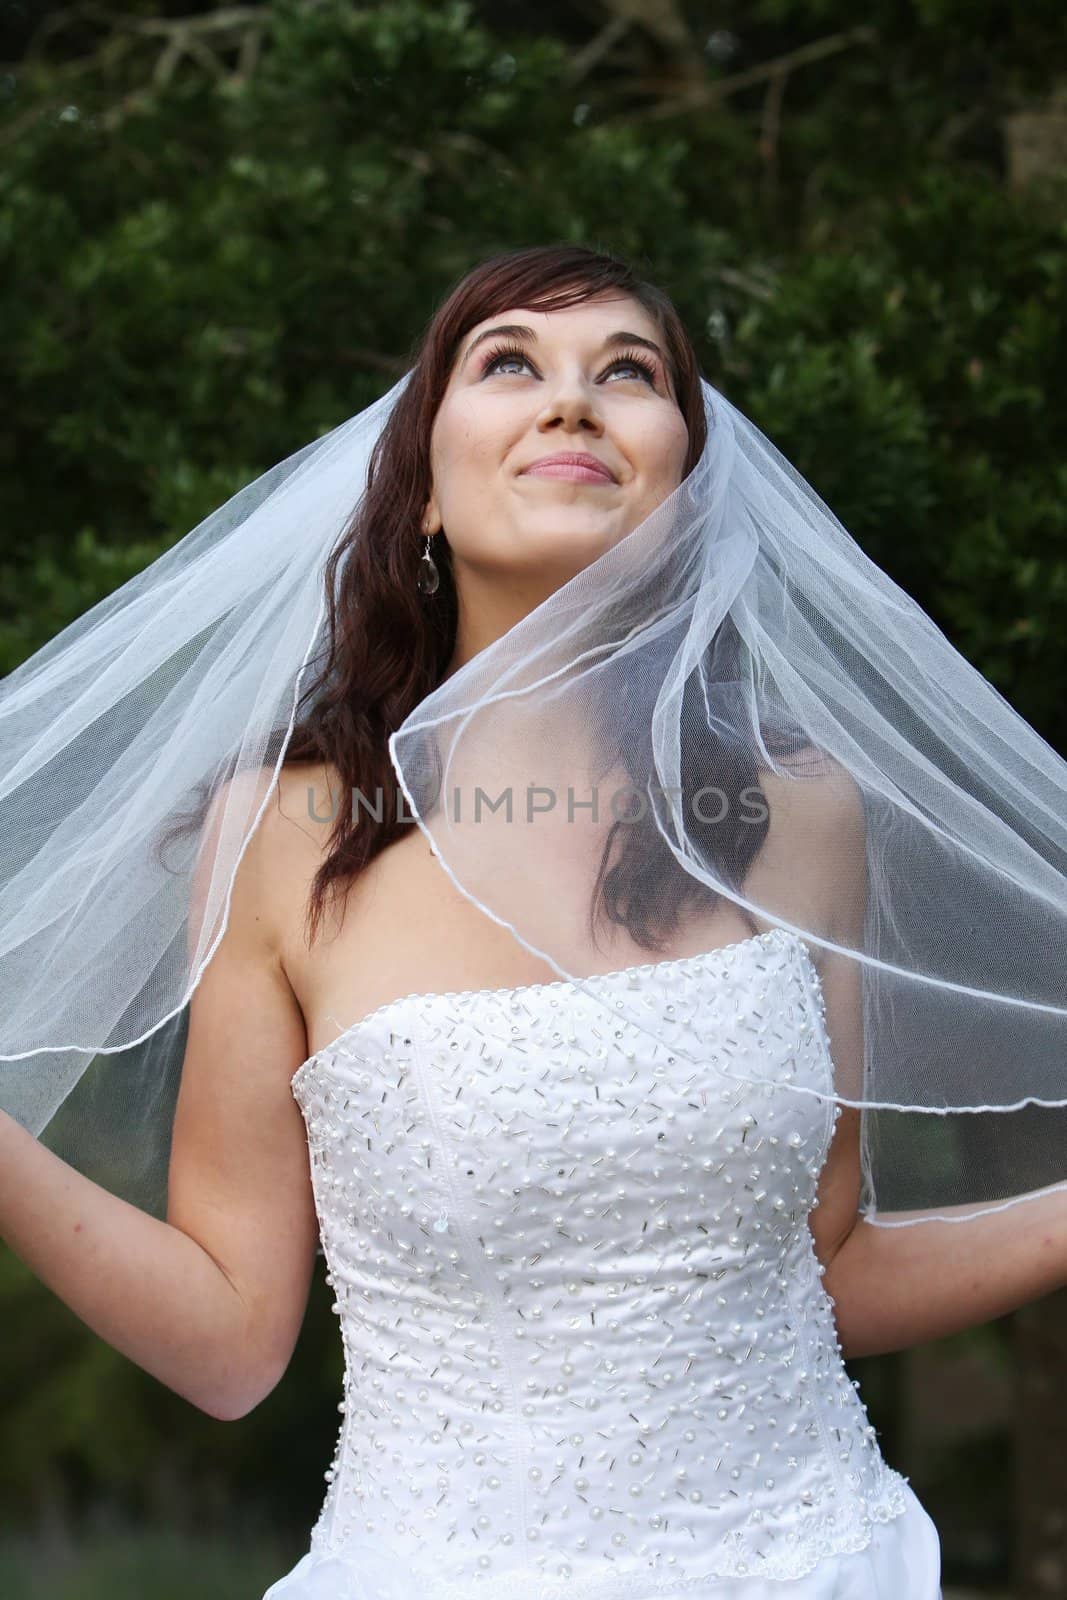 Stunning bride with lovely smile looking up in a beautiful wedding dress